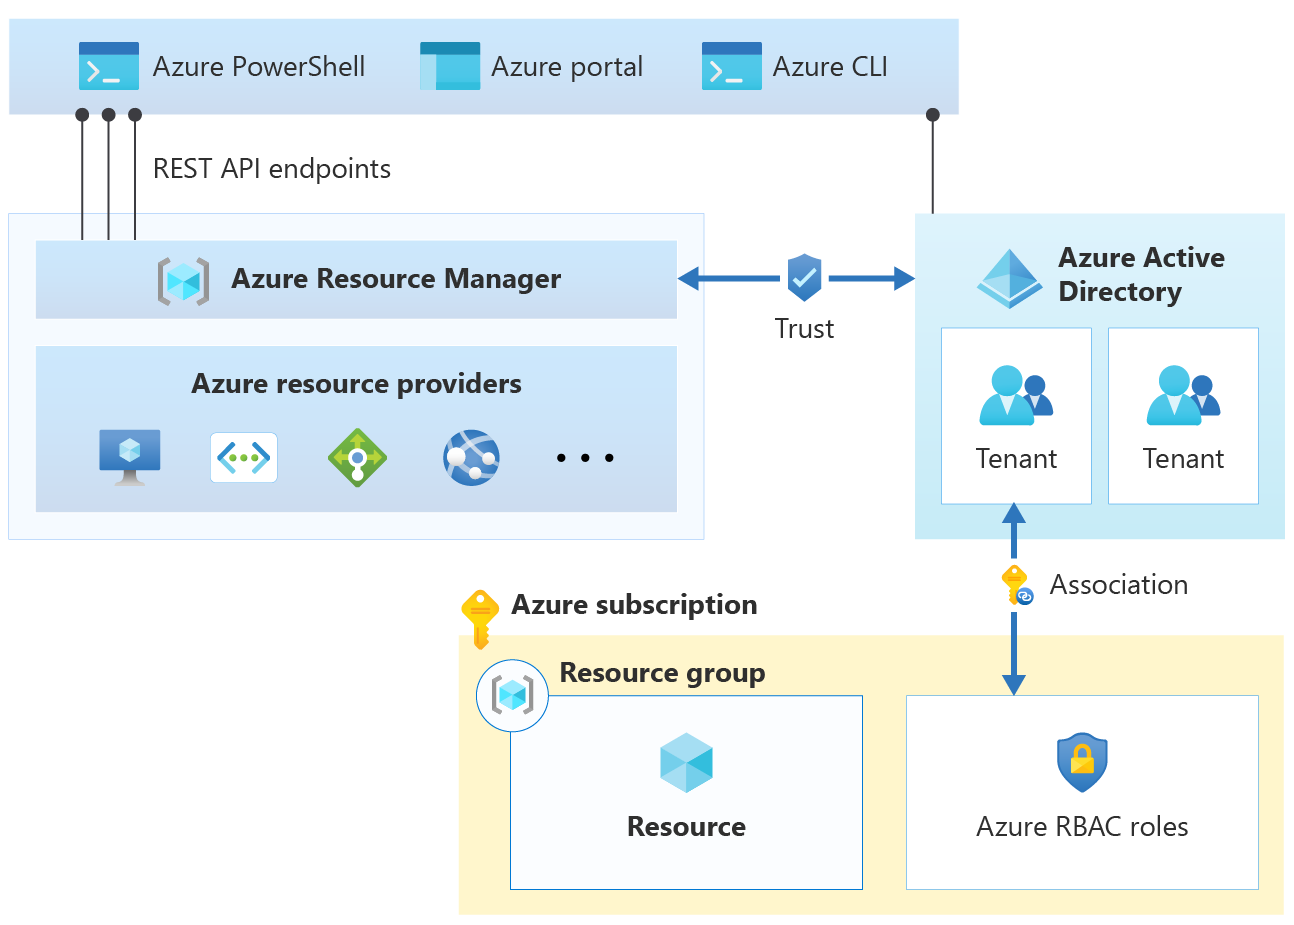 Users assigned to Azure roles